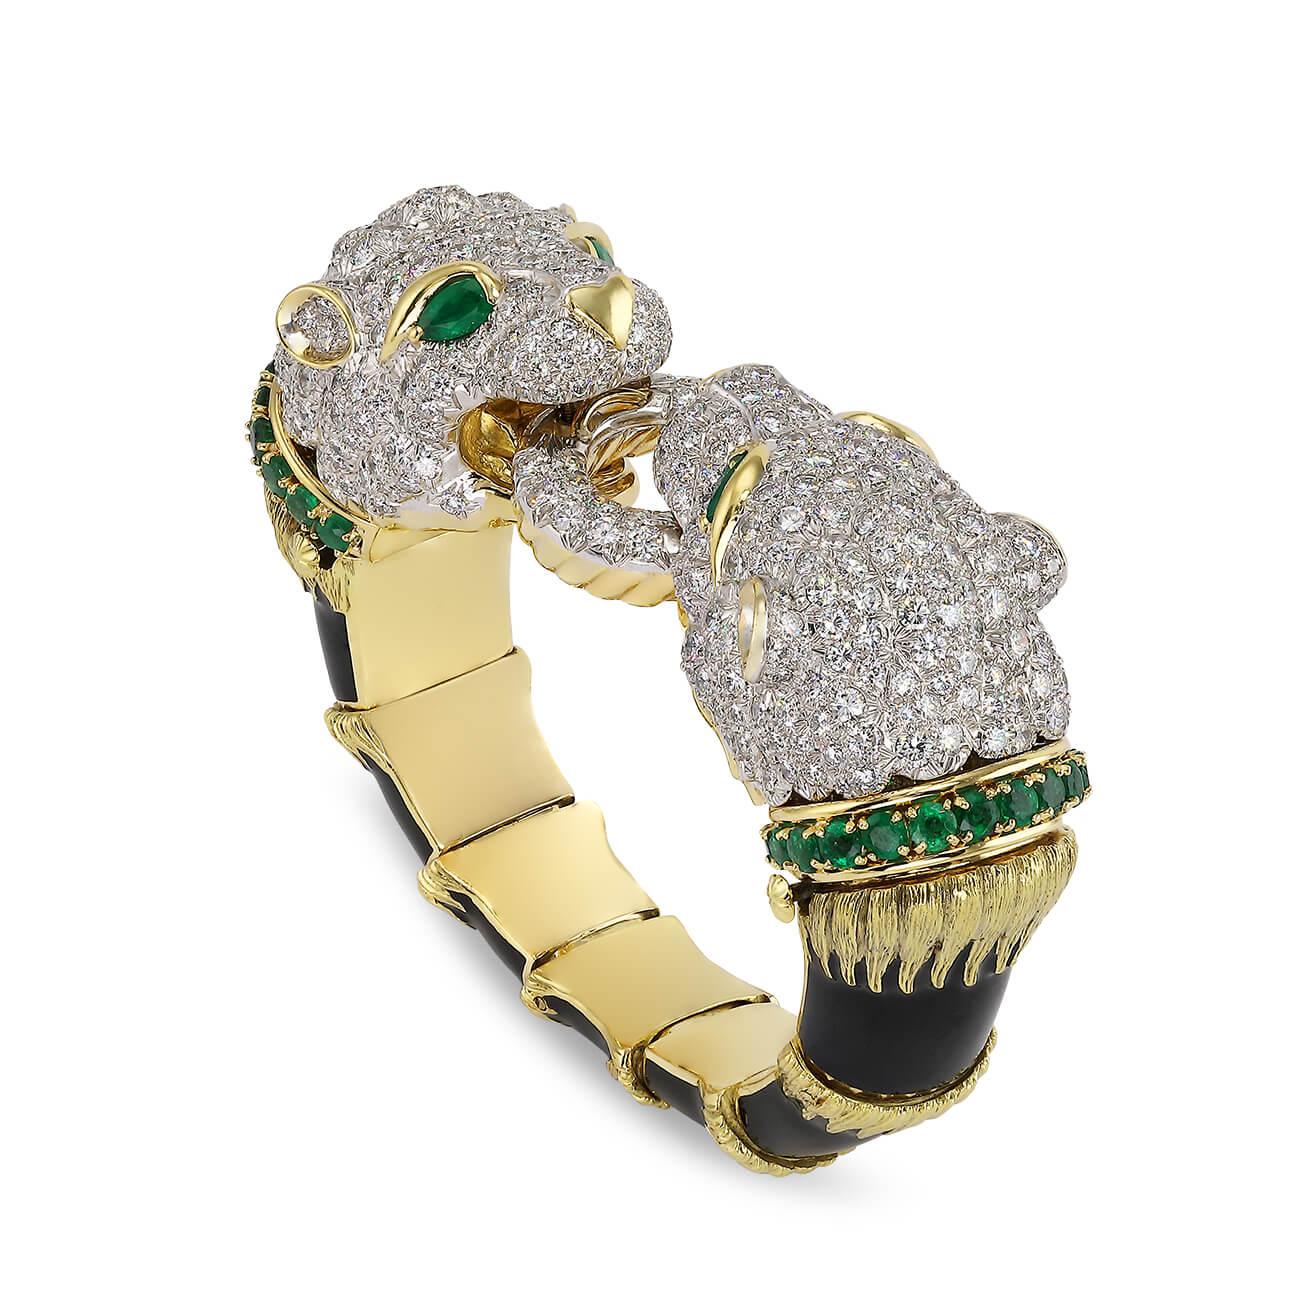 Vintage bangle part of the David Webb ‘Kingdom Collection’, two opposing round brilliant cut diamond filled lion heads on an 18k yellow gold and platinum bangle, each head detailed with emerald eyes and an emerald collar, both grasping a diamond and